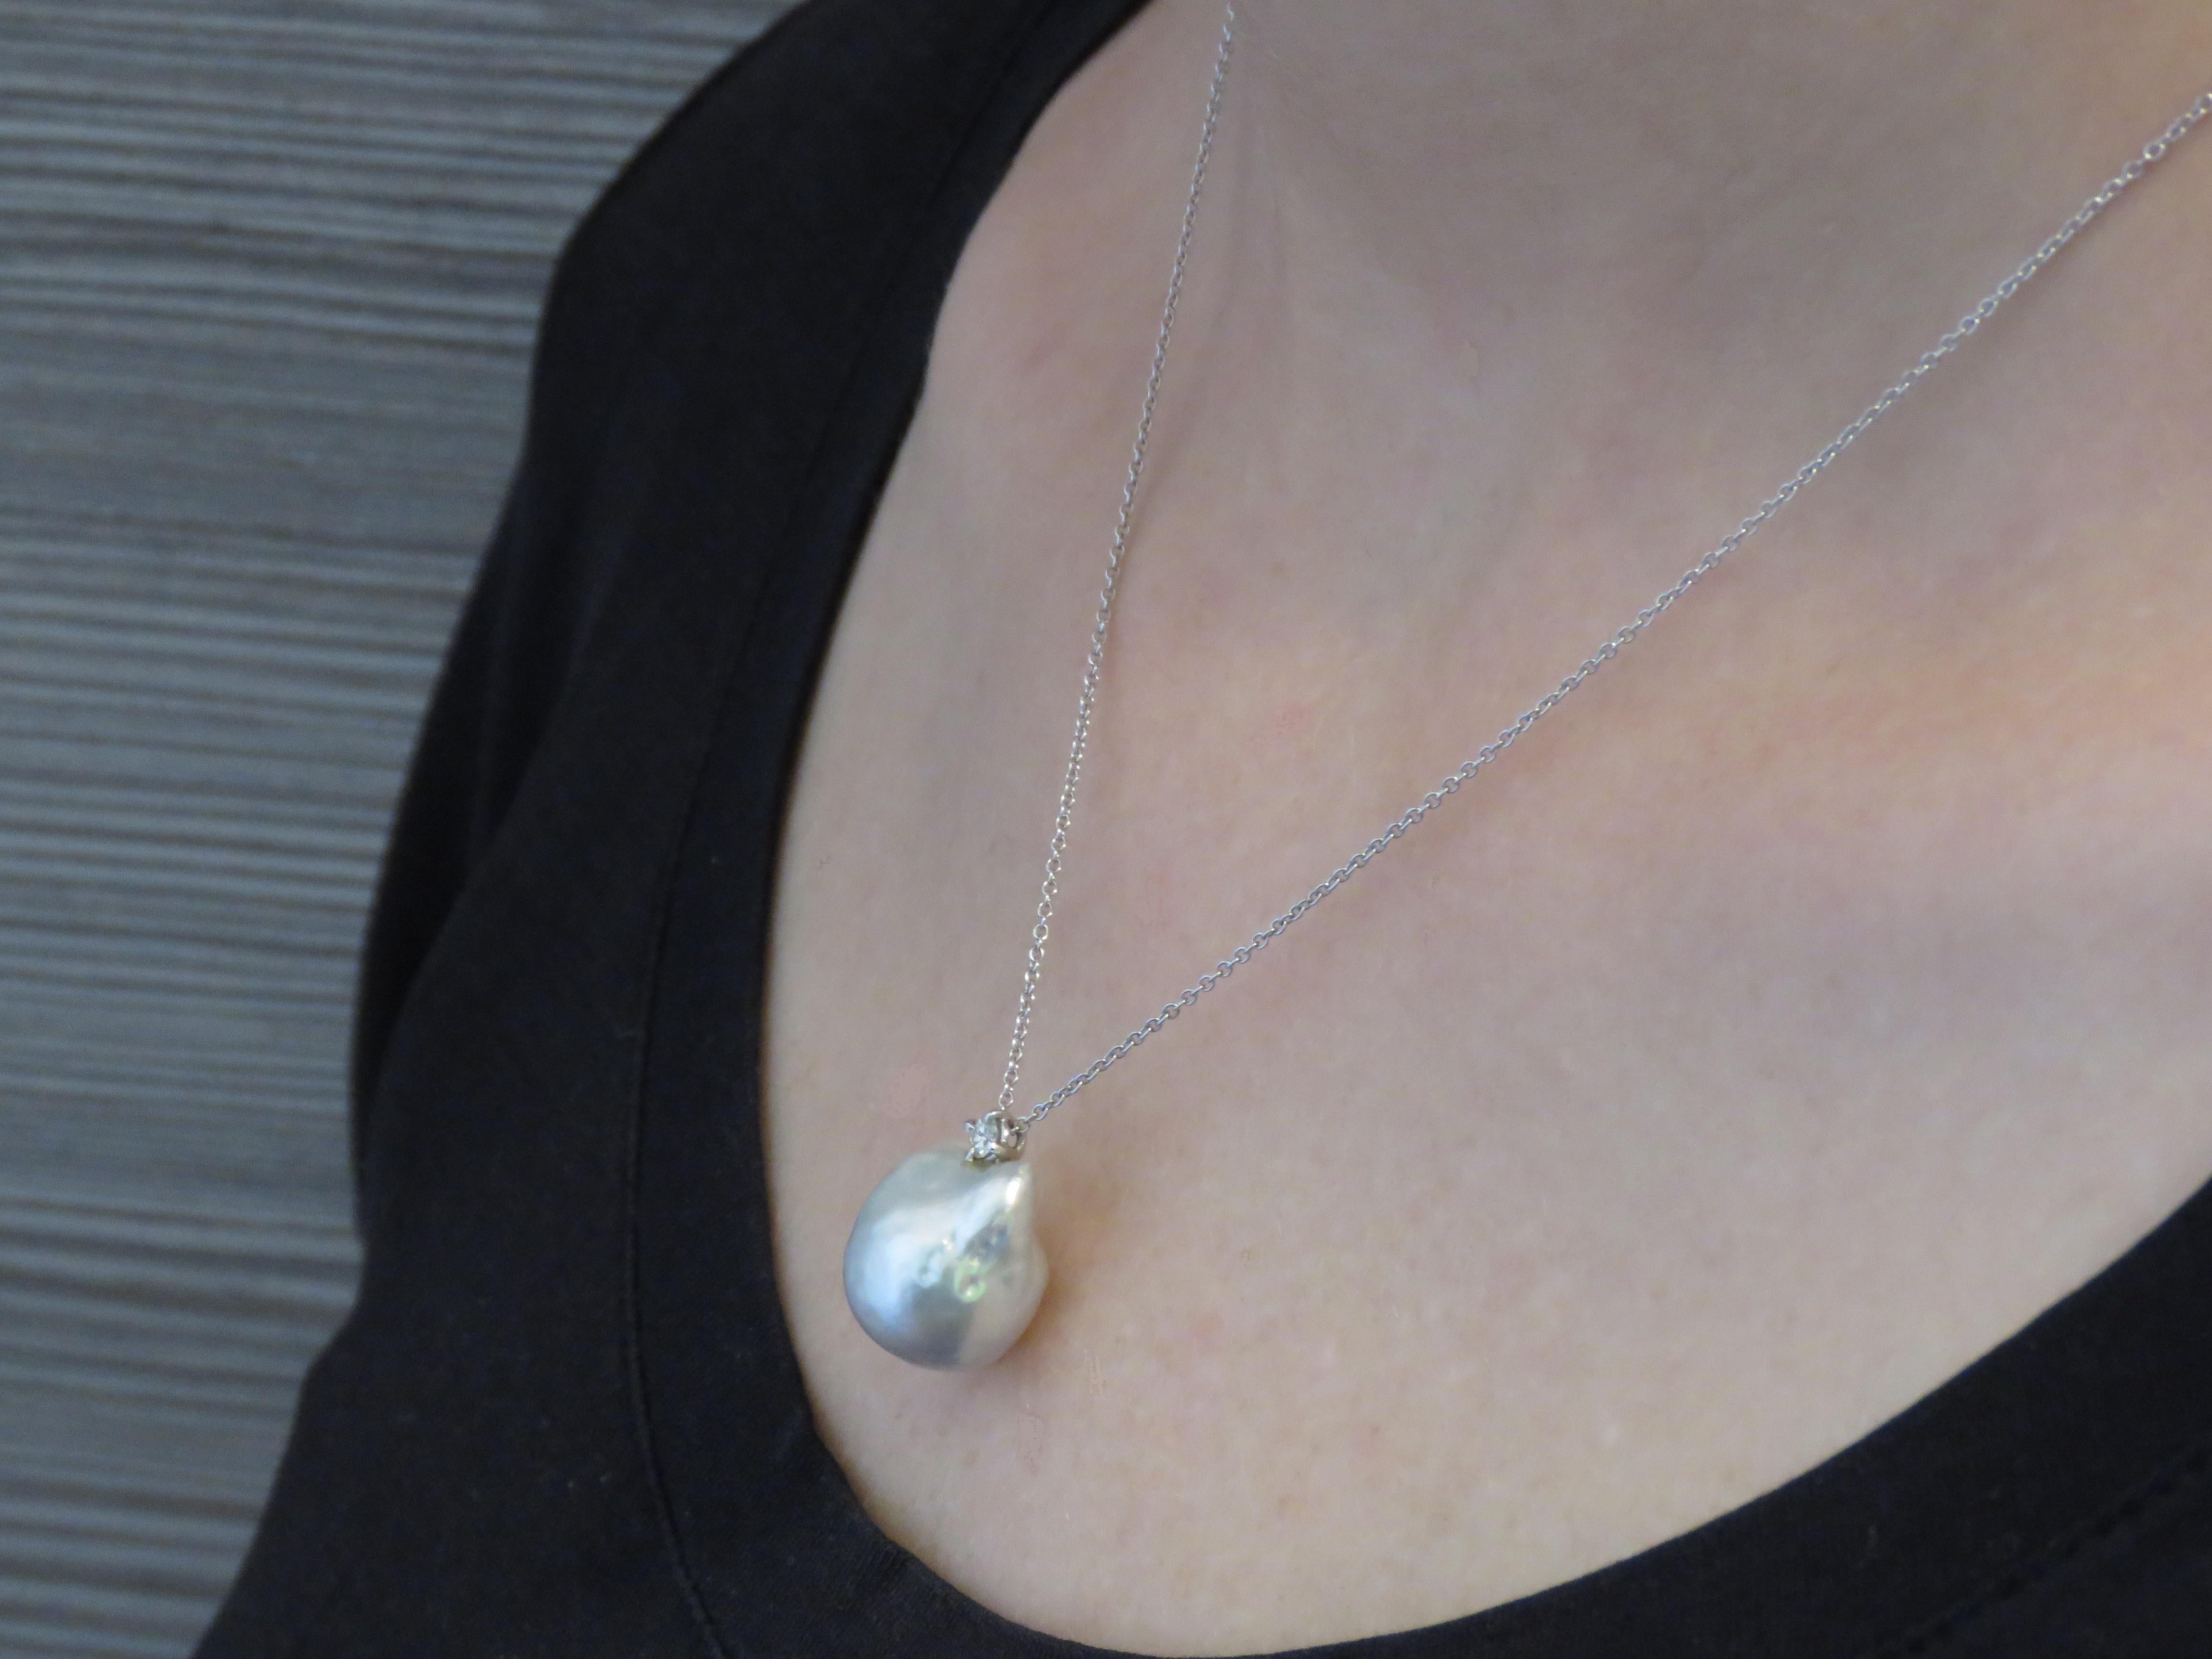 The round cut diamond 0.05 ctw and the Australian white pearl that characterize this white gold necklace are both natural. The size of the pearl is 16 x 13 millimeters / 0.629 x 0.511 inches. The total length of the necklace is 430 millimeters /